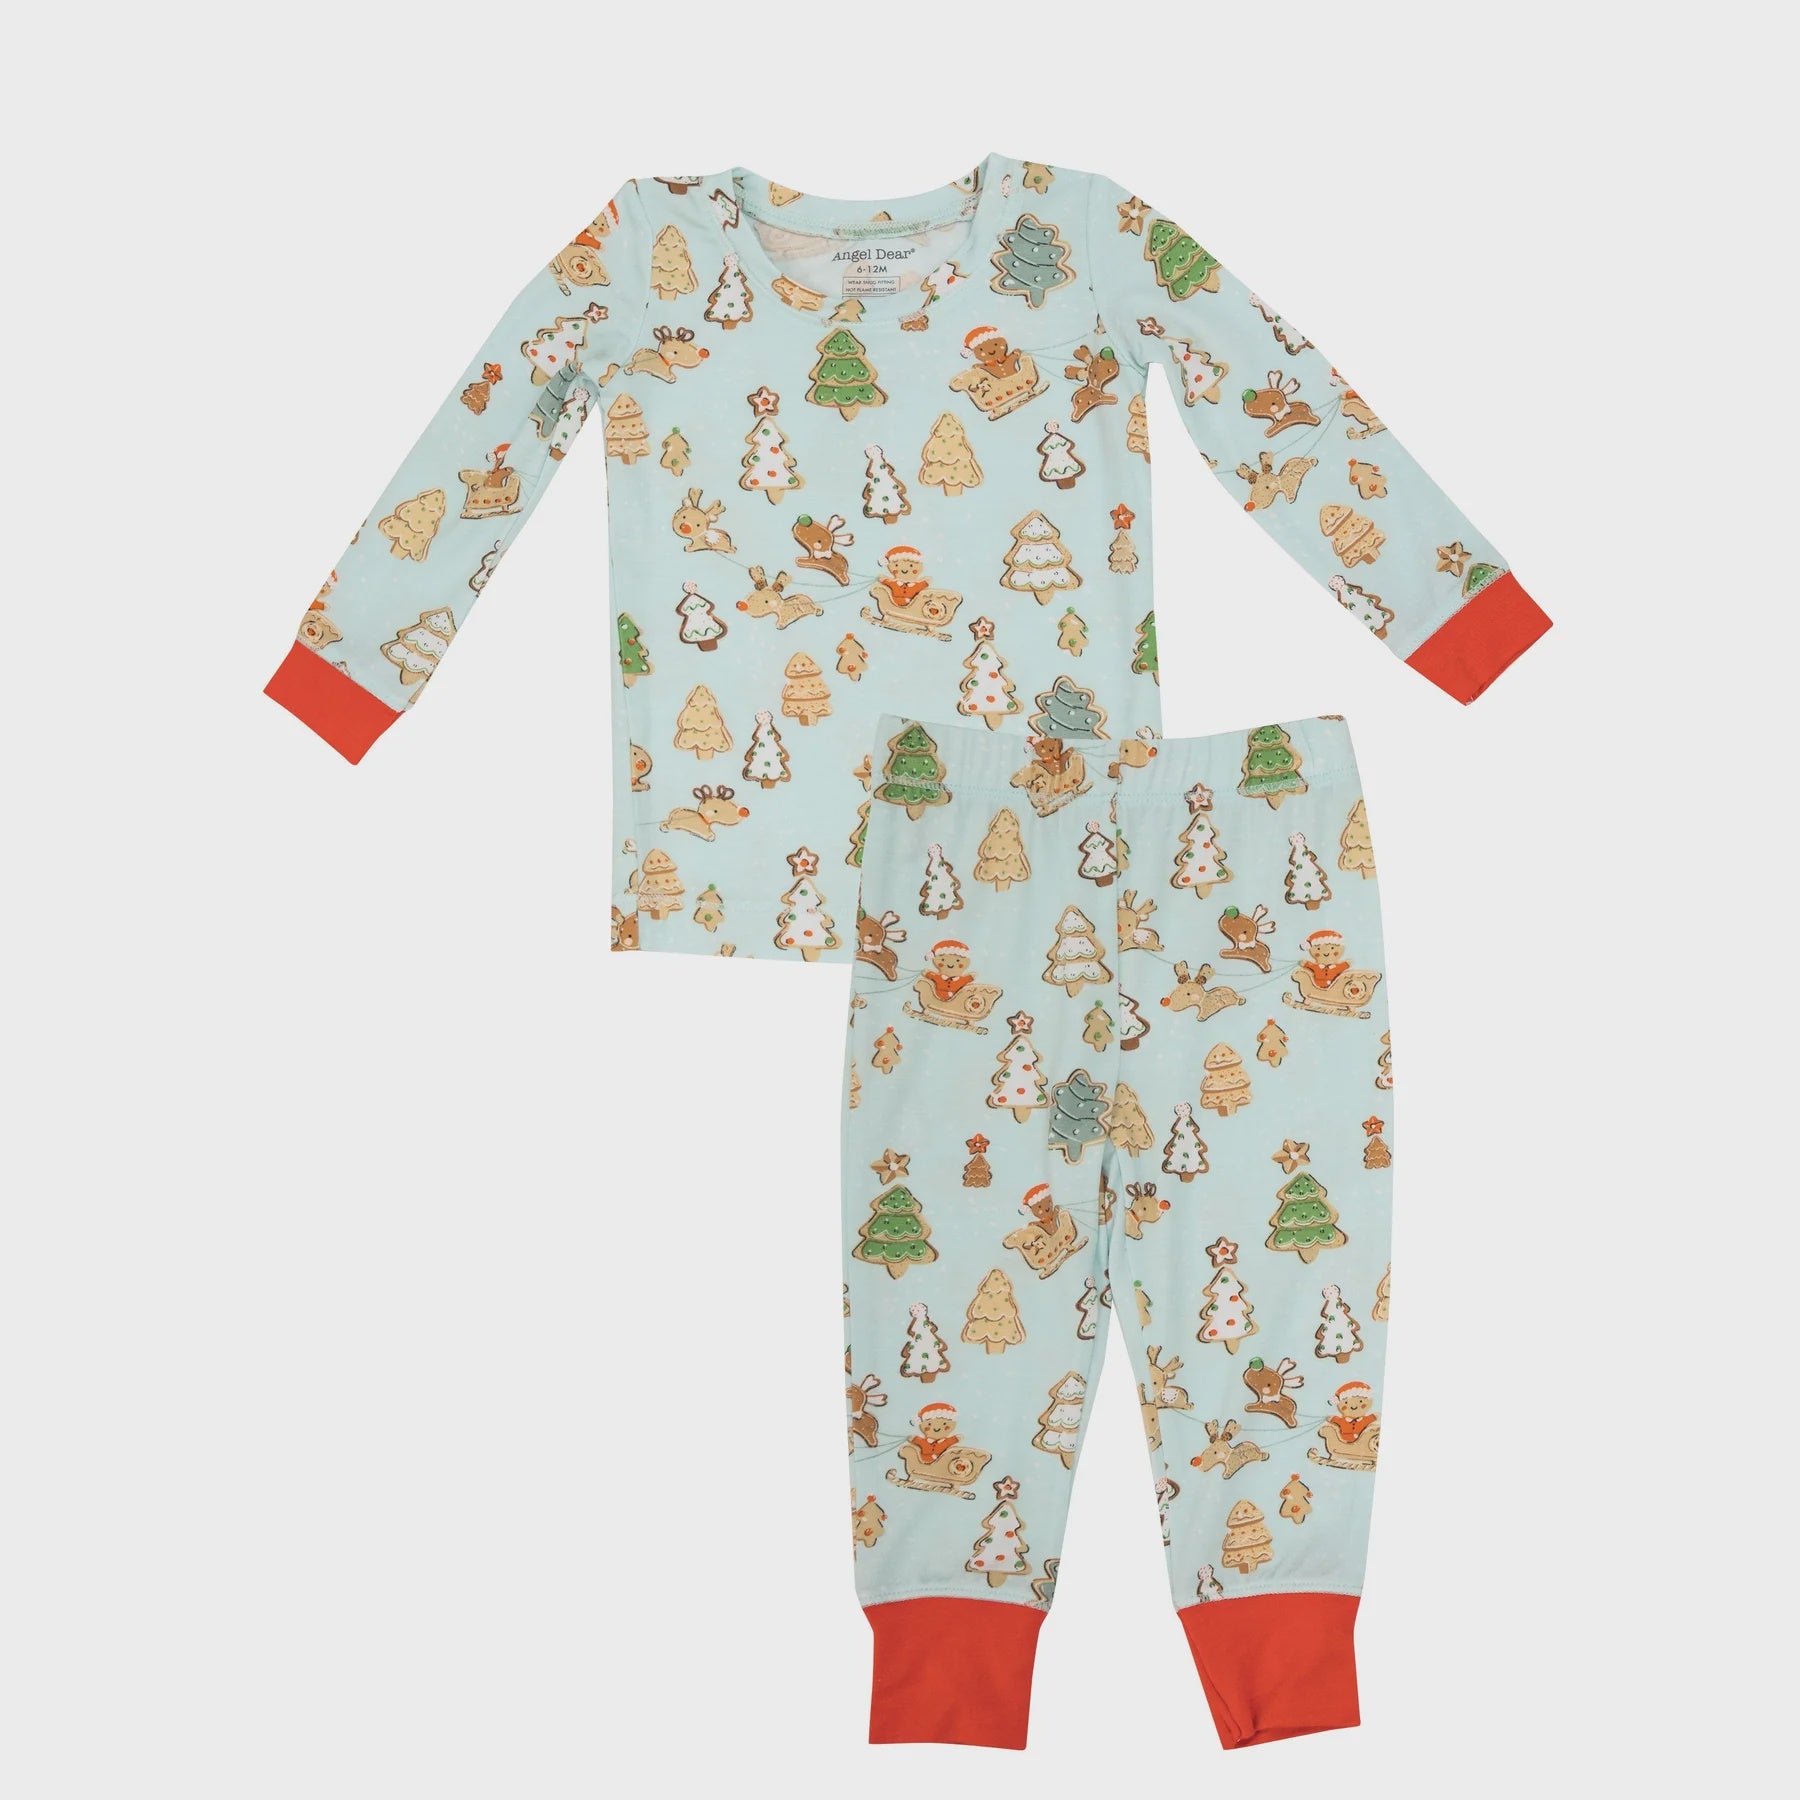 Holiday Lounge Wear Set - Gingerbread Sleigh Ride